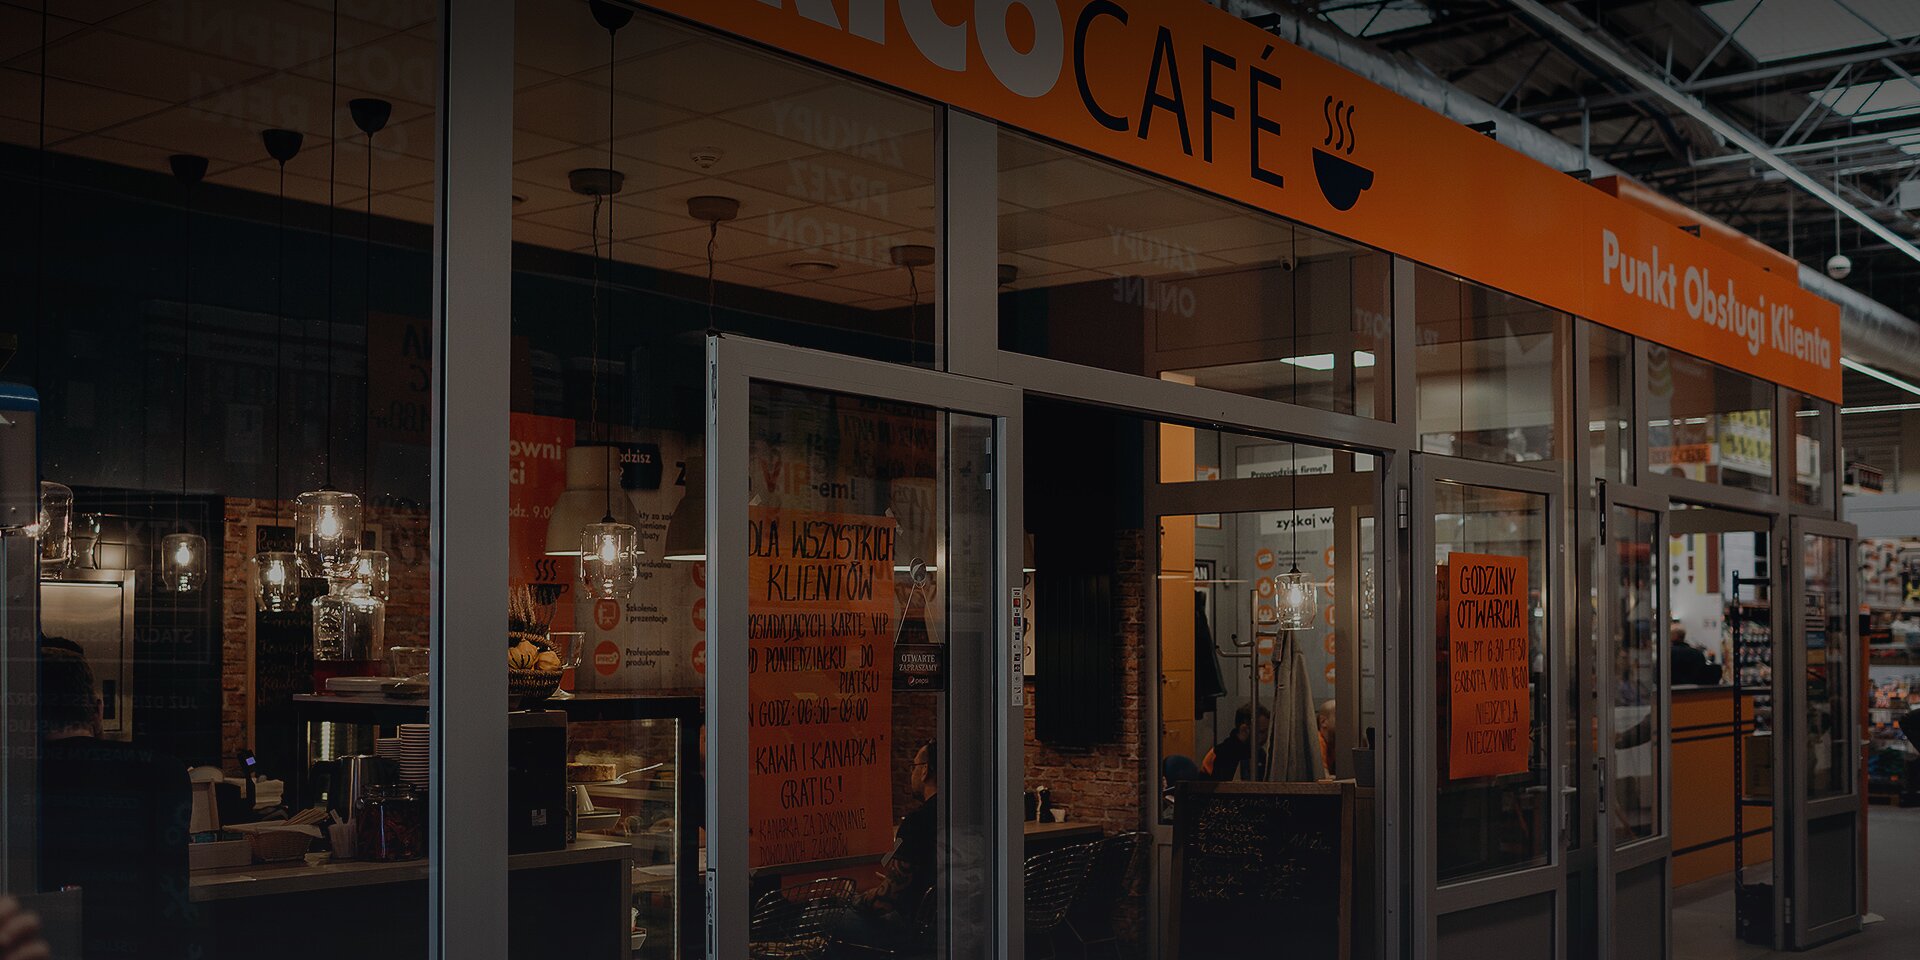 Brico Cafe <small>Food & Cafe</small>